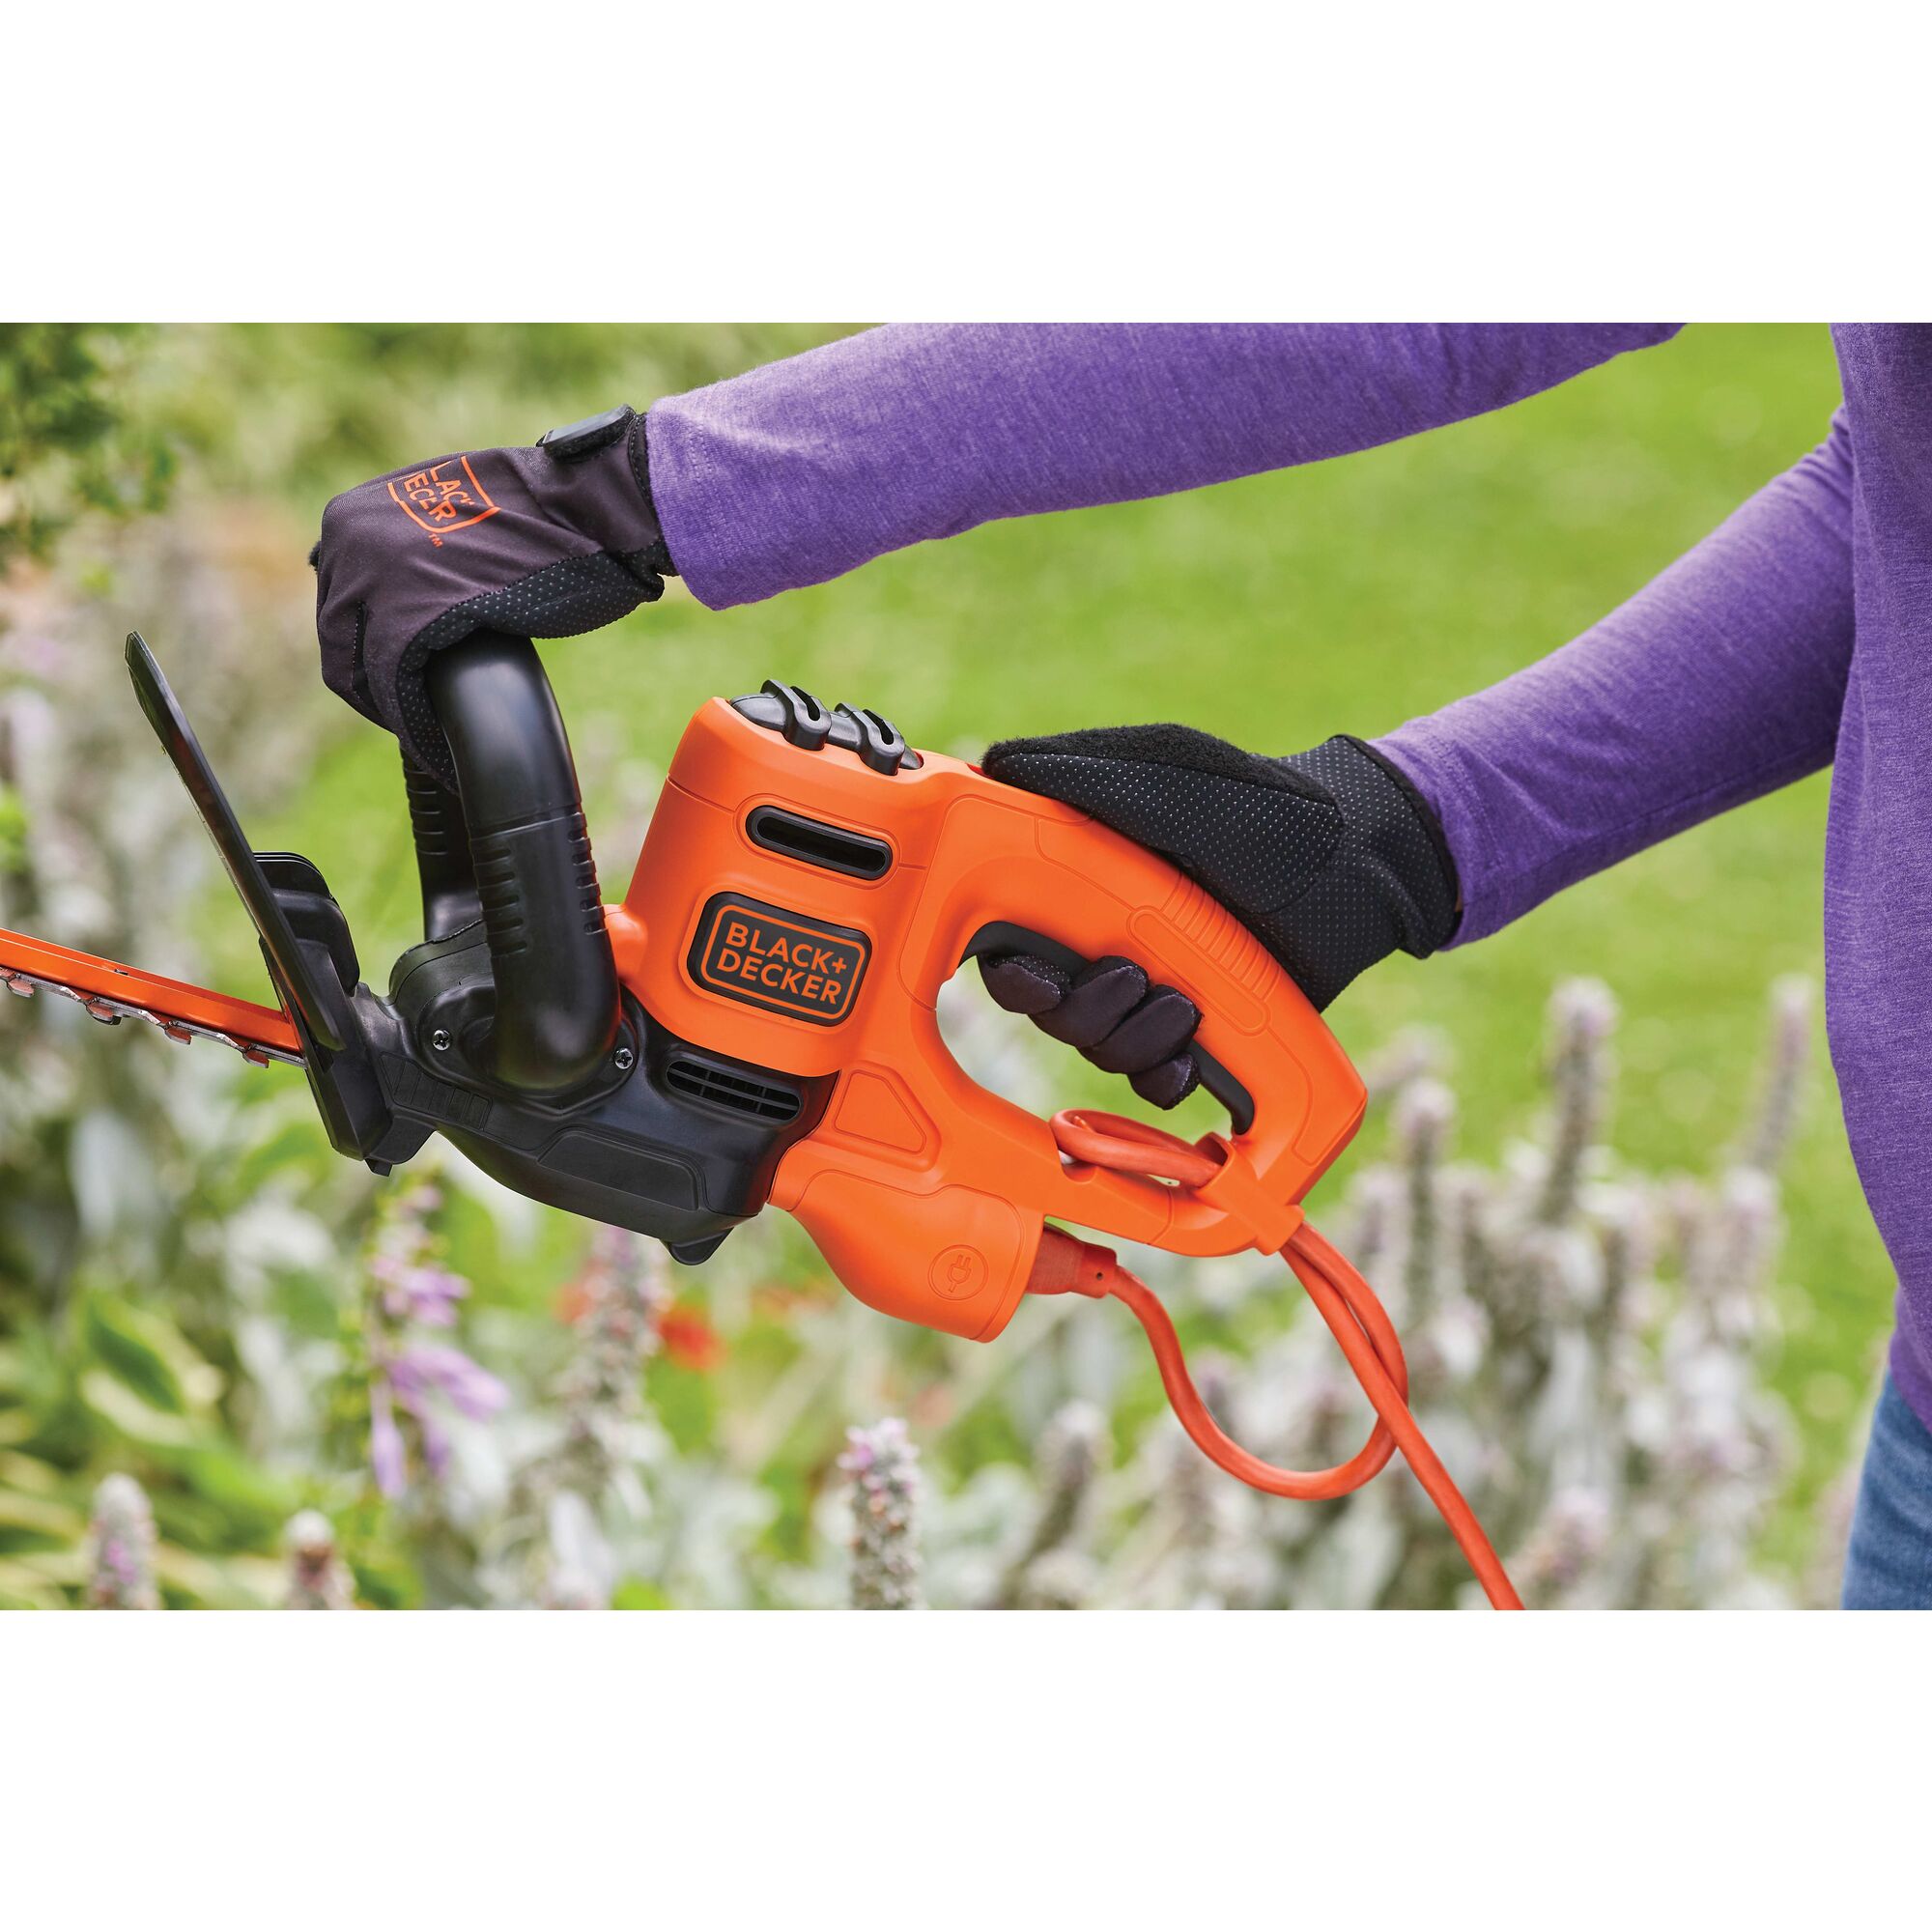 Wrap around front handle feature of 18 inch electric hedge trimmer.